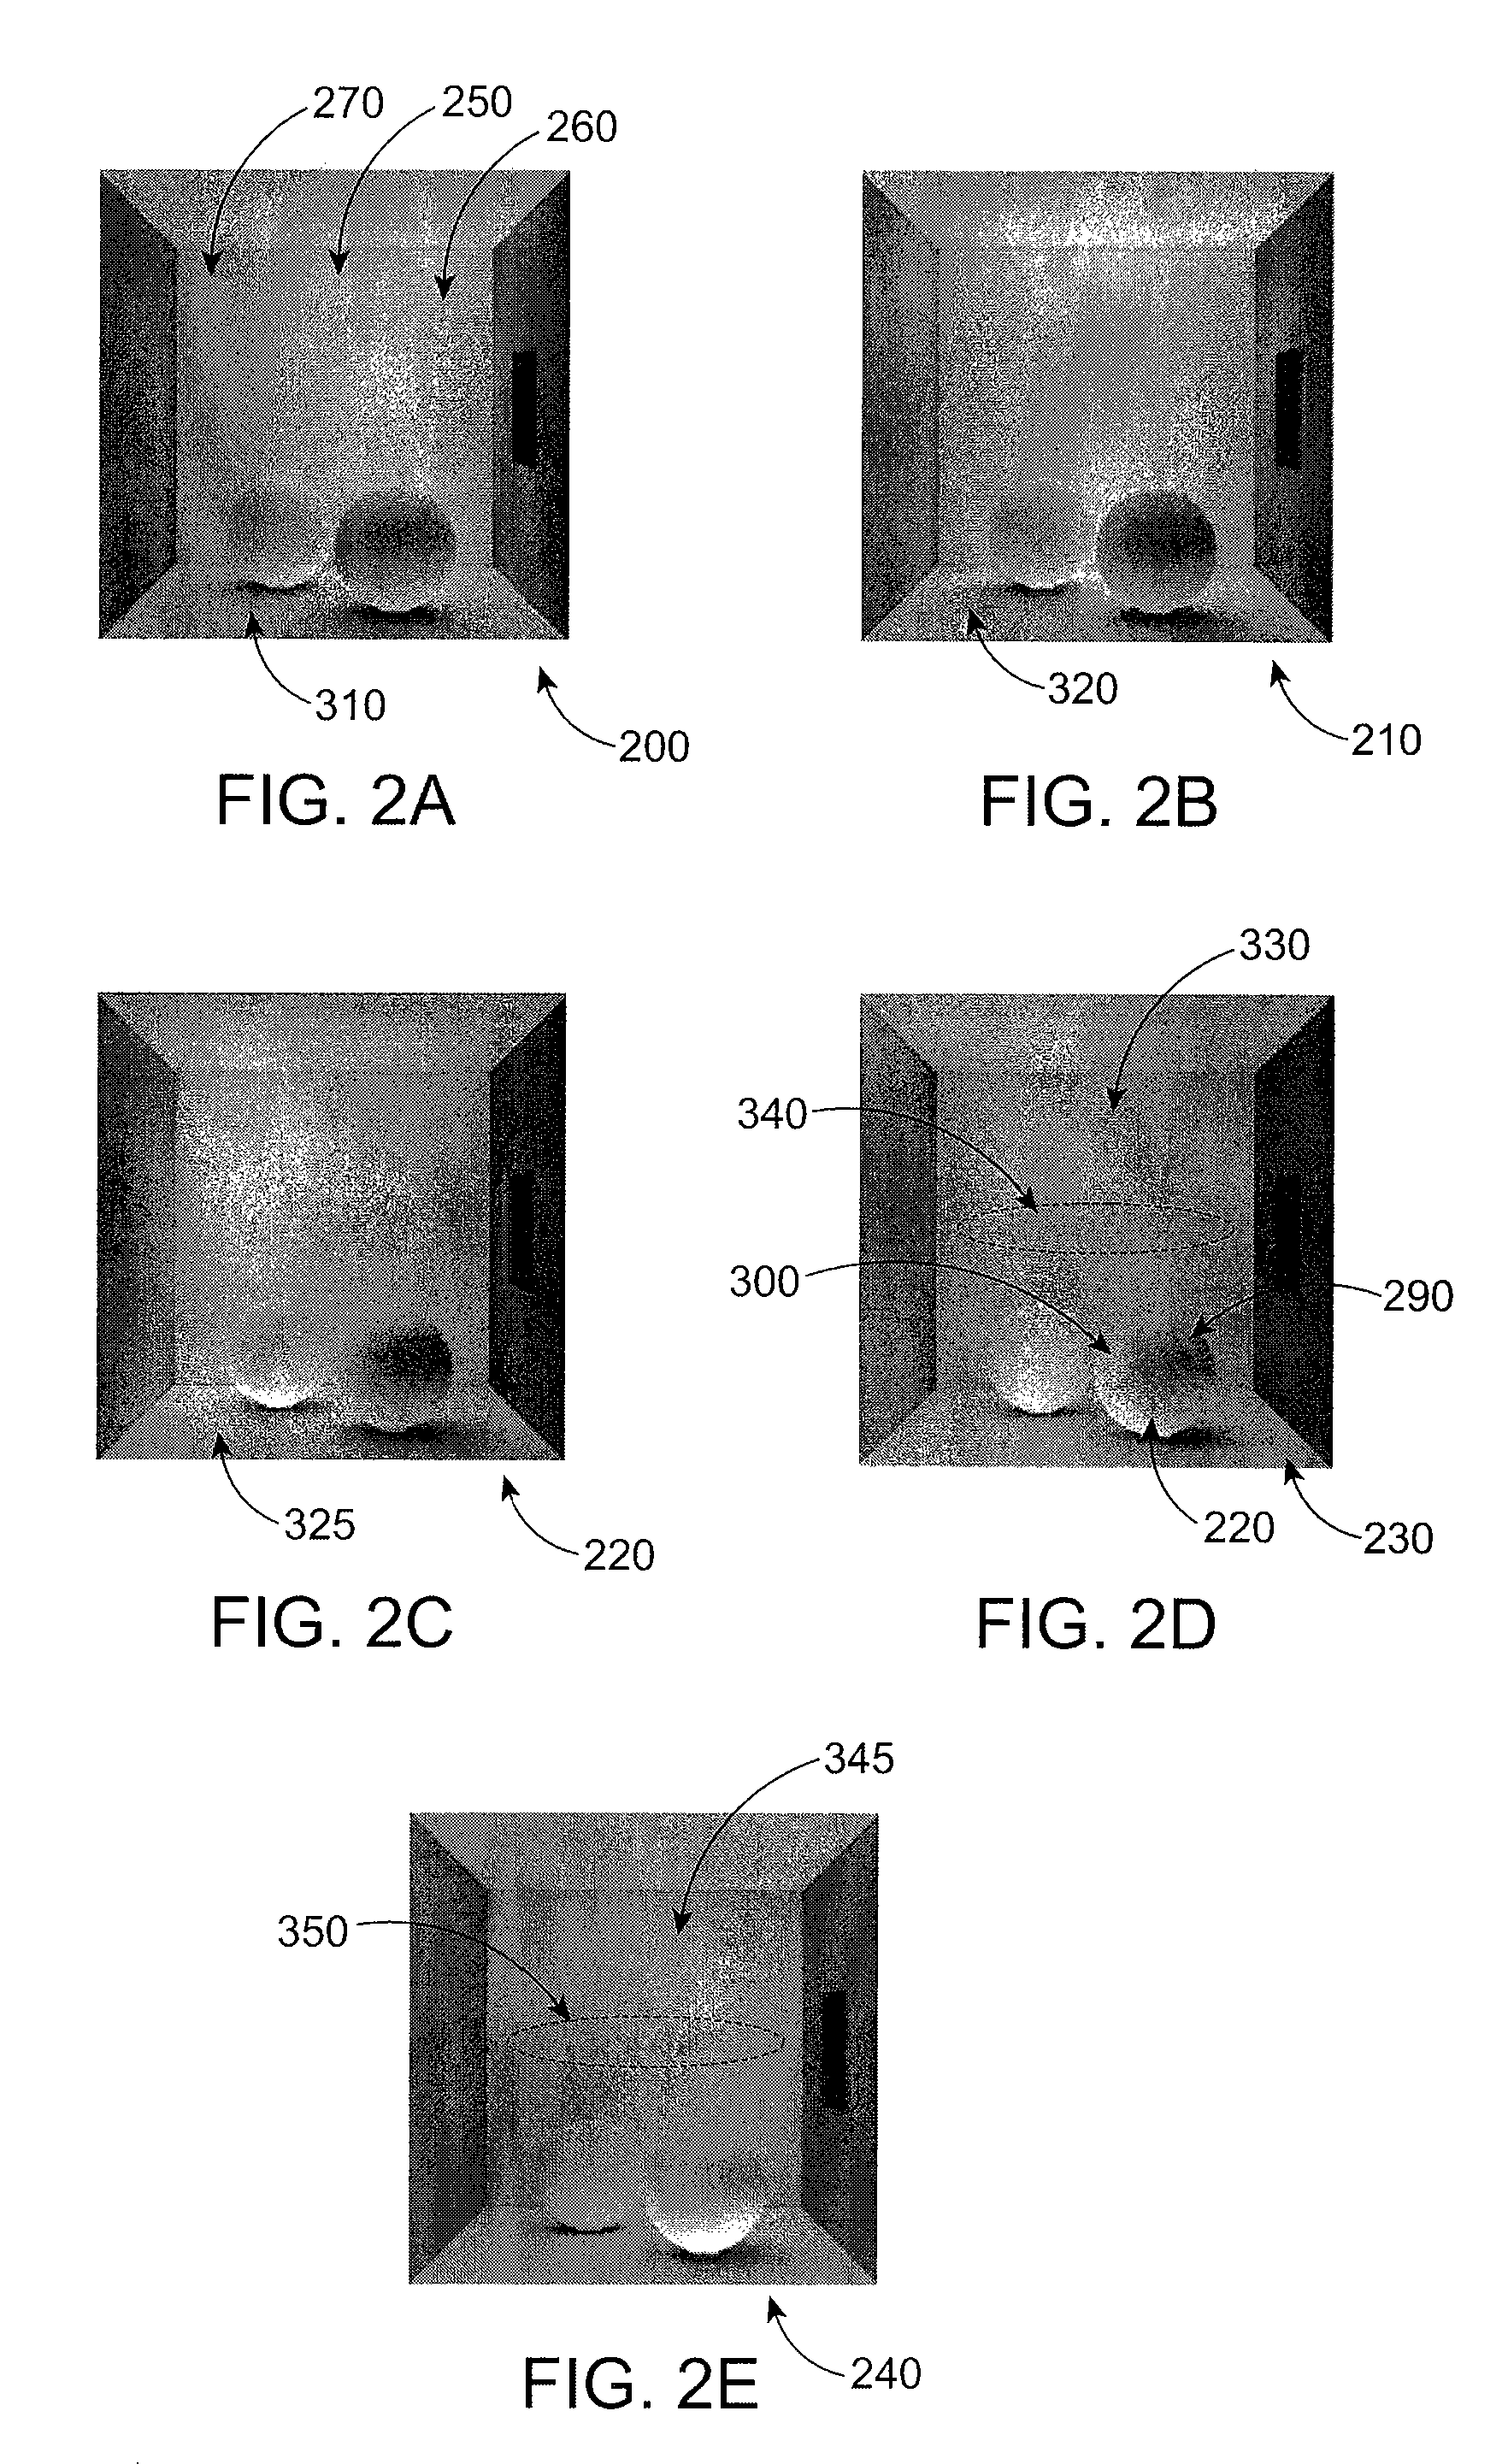 Methods and apparatus for determining high quality sampling data from low quality sampling data